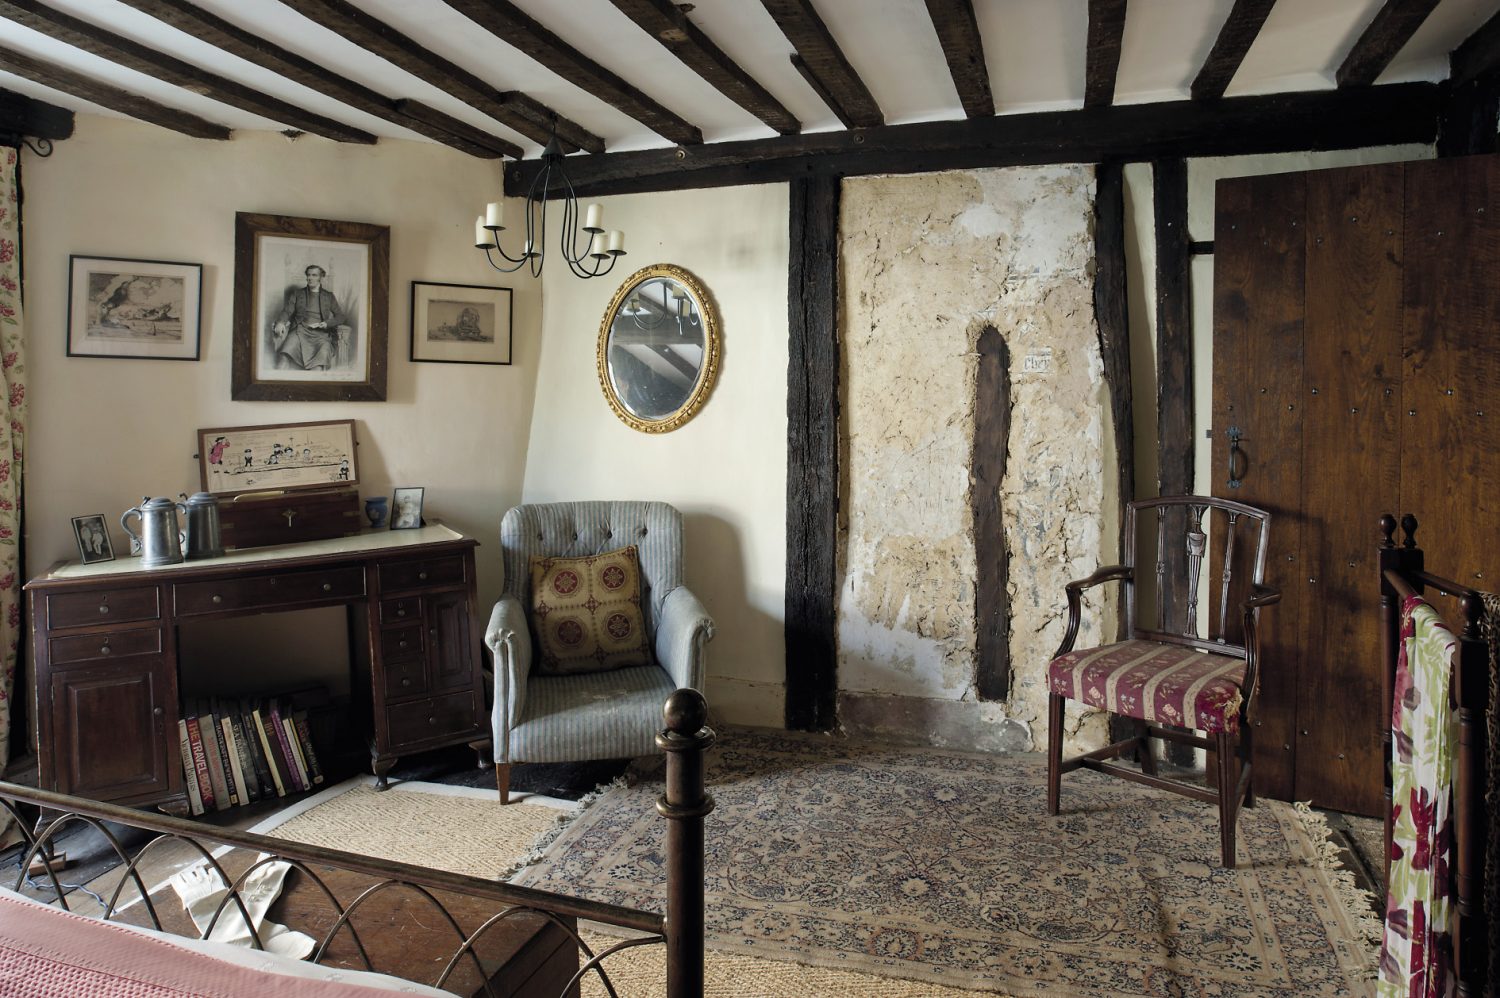 In the guestroom at the front of the house, part of the wallcovering has been scraped away to reveal a panel of pargeting and painting that must date from the 1480s when this house is believed to have been built